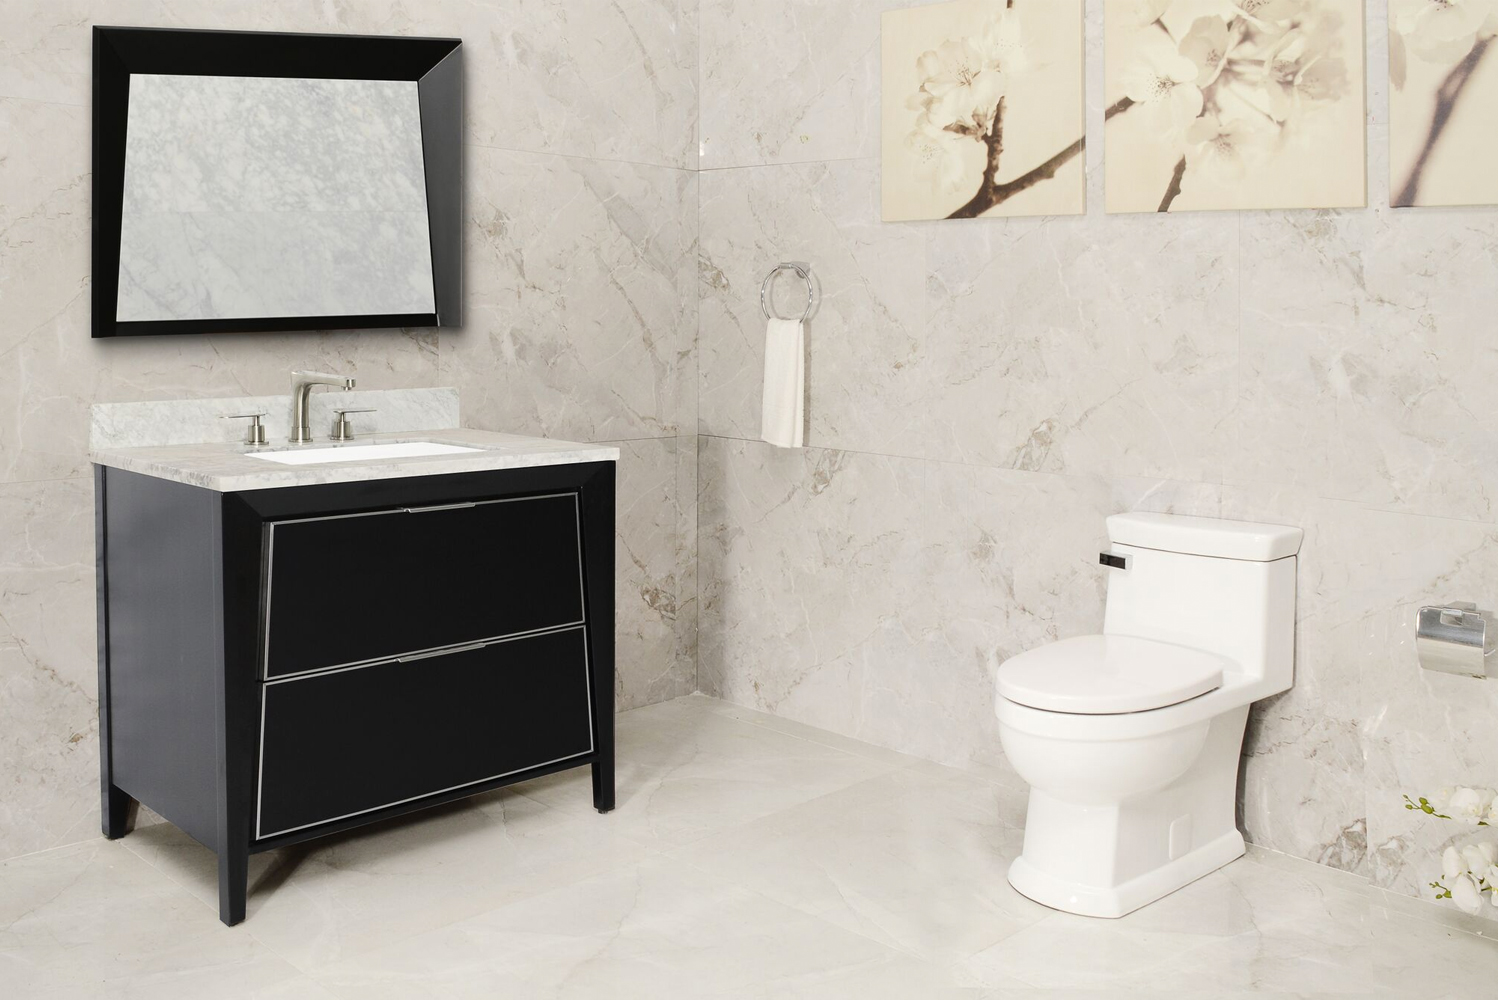 As a high-efficiency toilet consuming only 128 gallons per flush the Canto has an oversized 2 18 trapway and 3 flush v